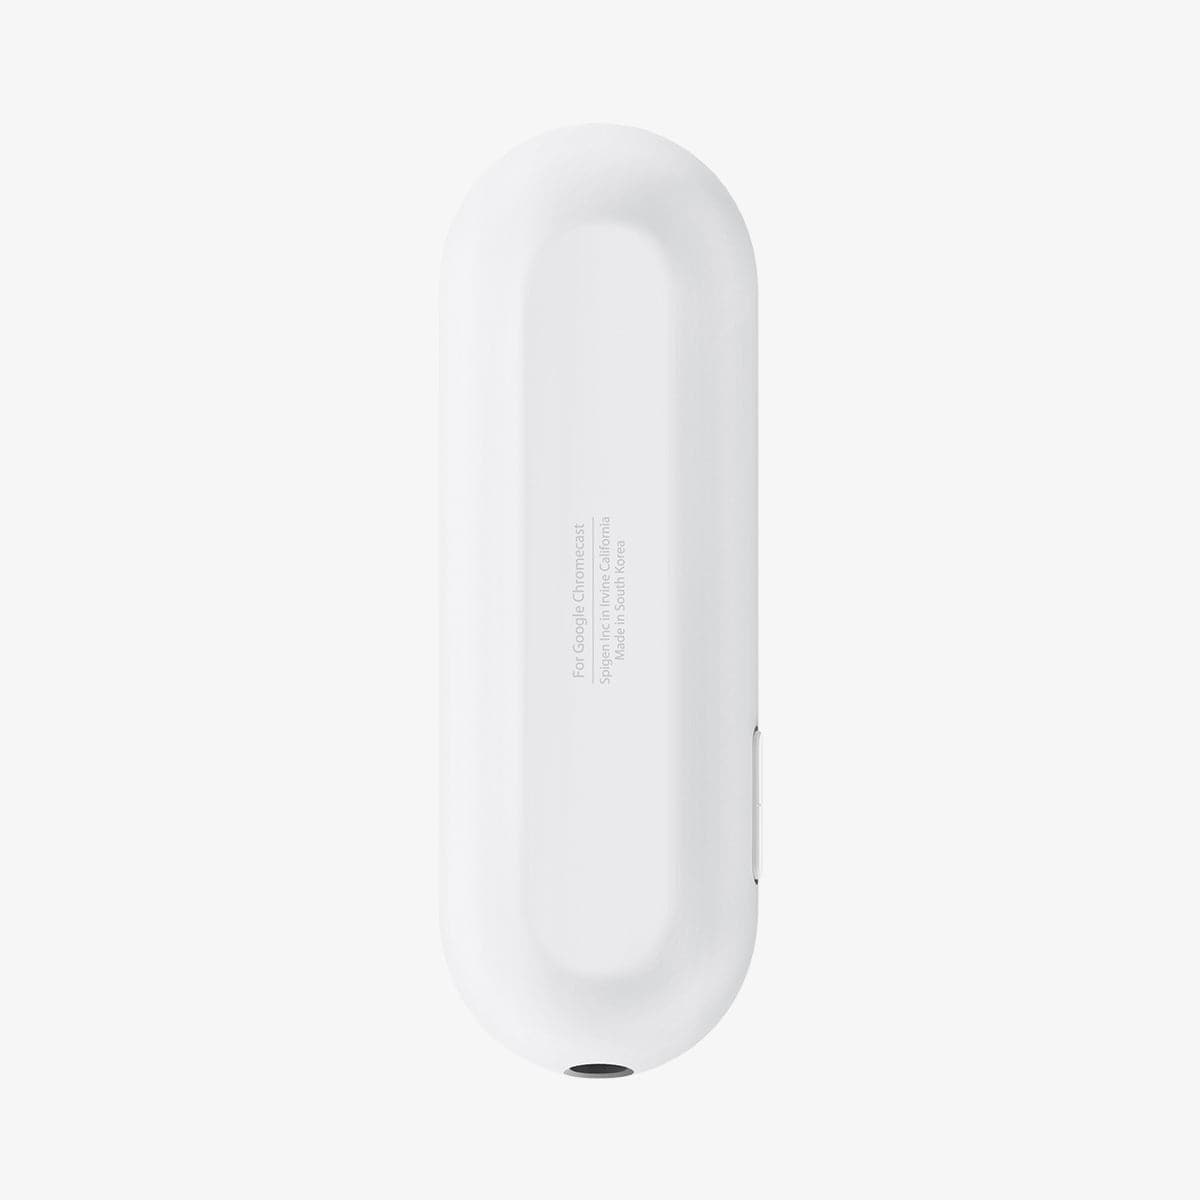 AMP02715 - Chromecast with Google TV Silicone Fit Voice Remote in white showing the back